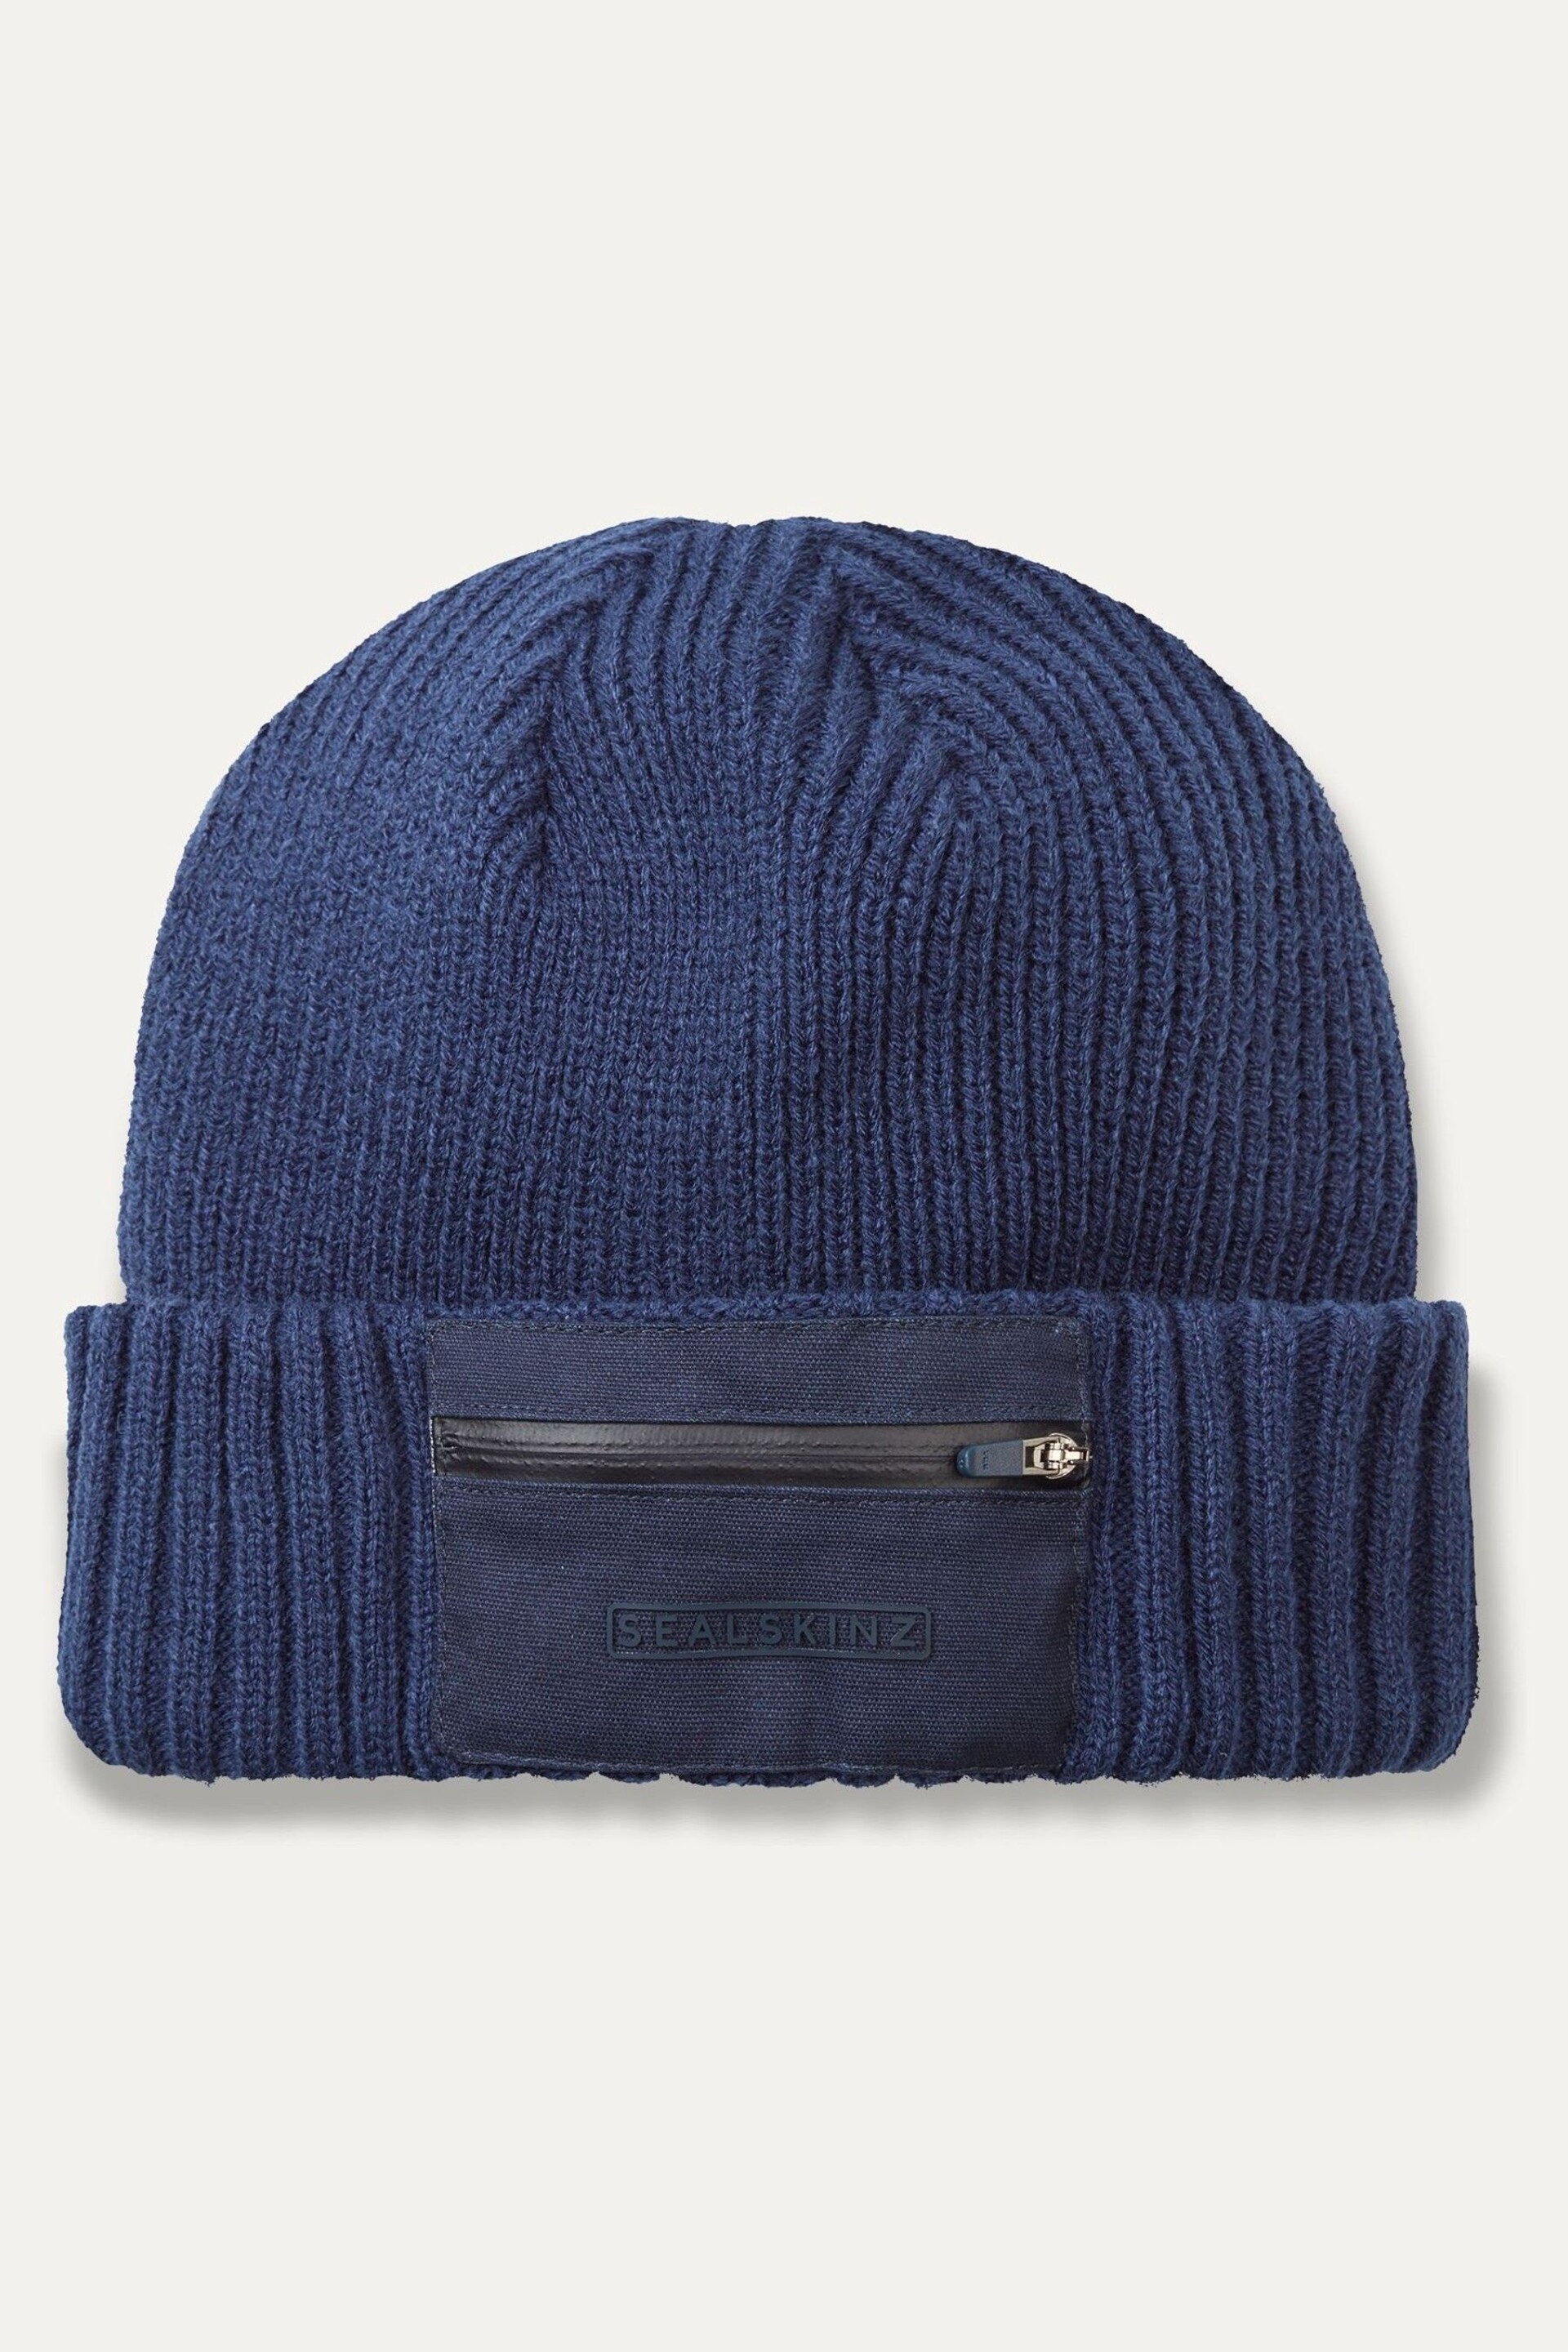 Sealskinz Colby Waterproof Zipped Pocket Knitted Beanie - Image 1 of 2